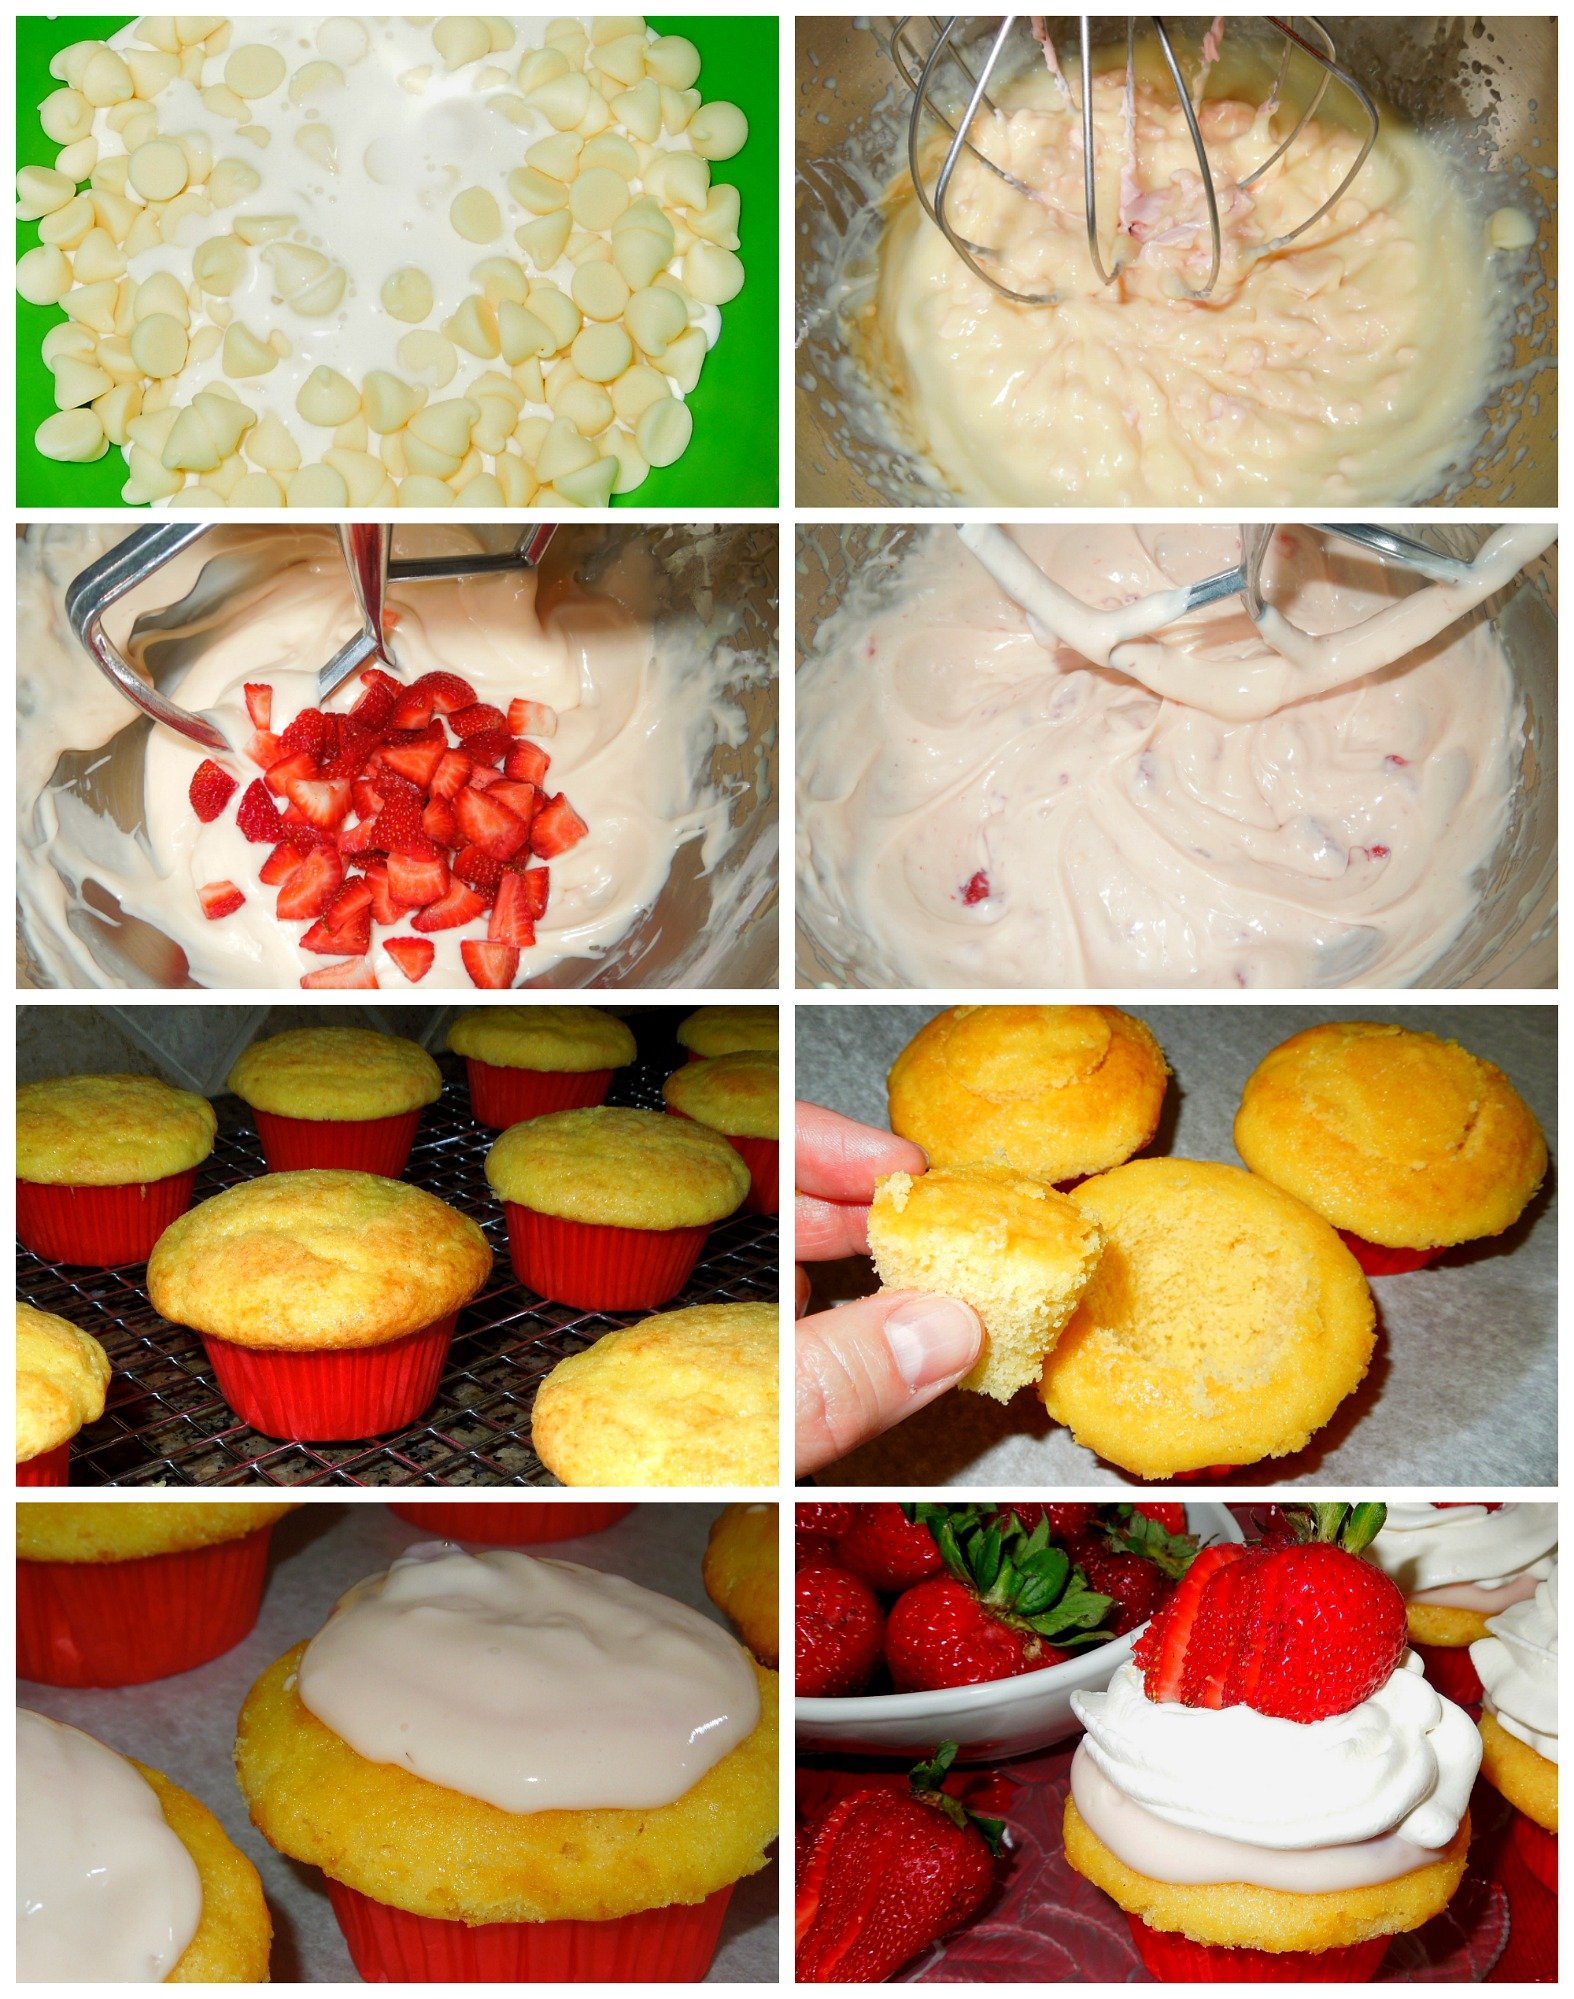 Step-by-step preparation images and ingredients to make Strawberries And Cream Filled Cupcakes